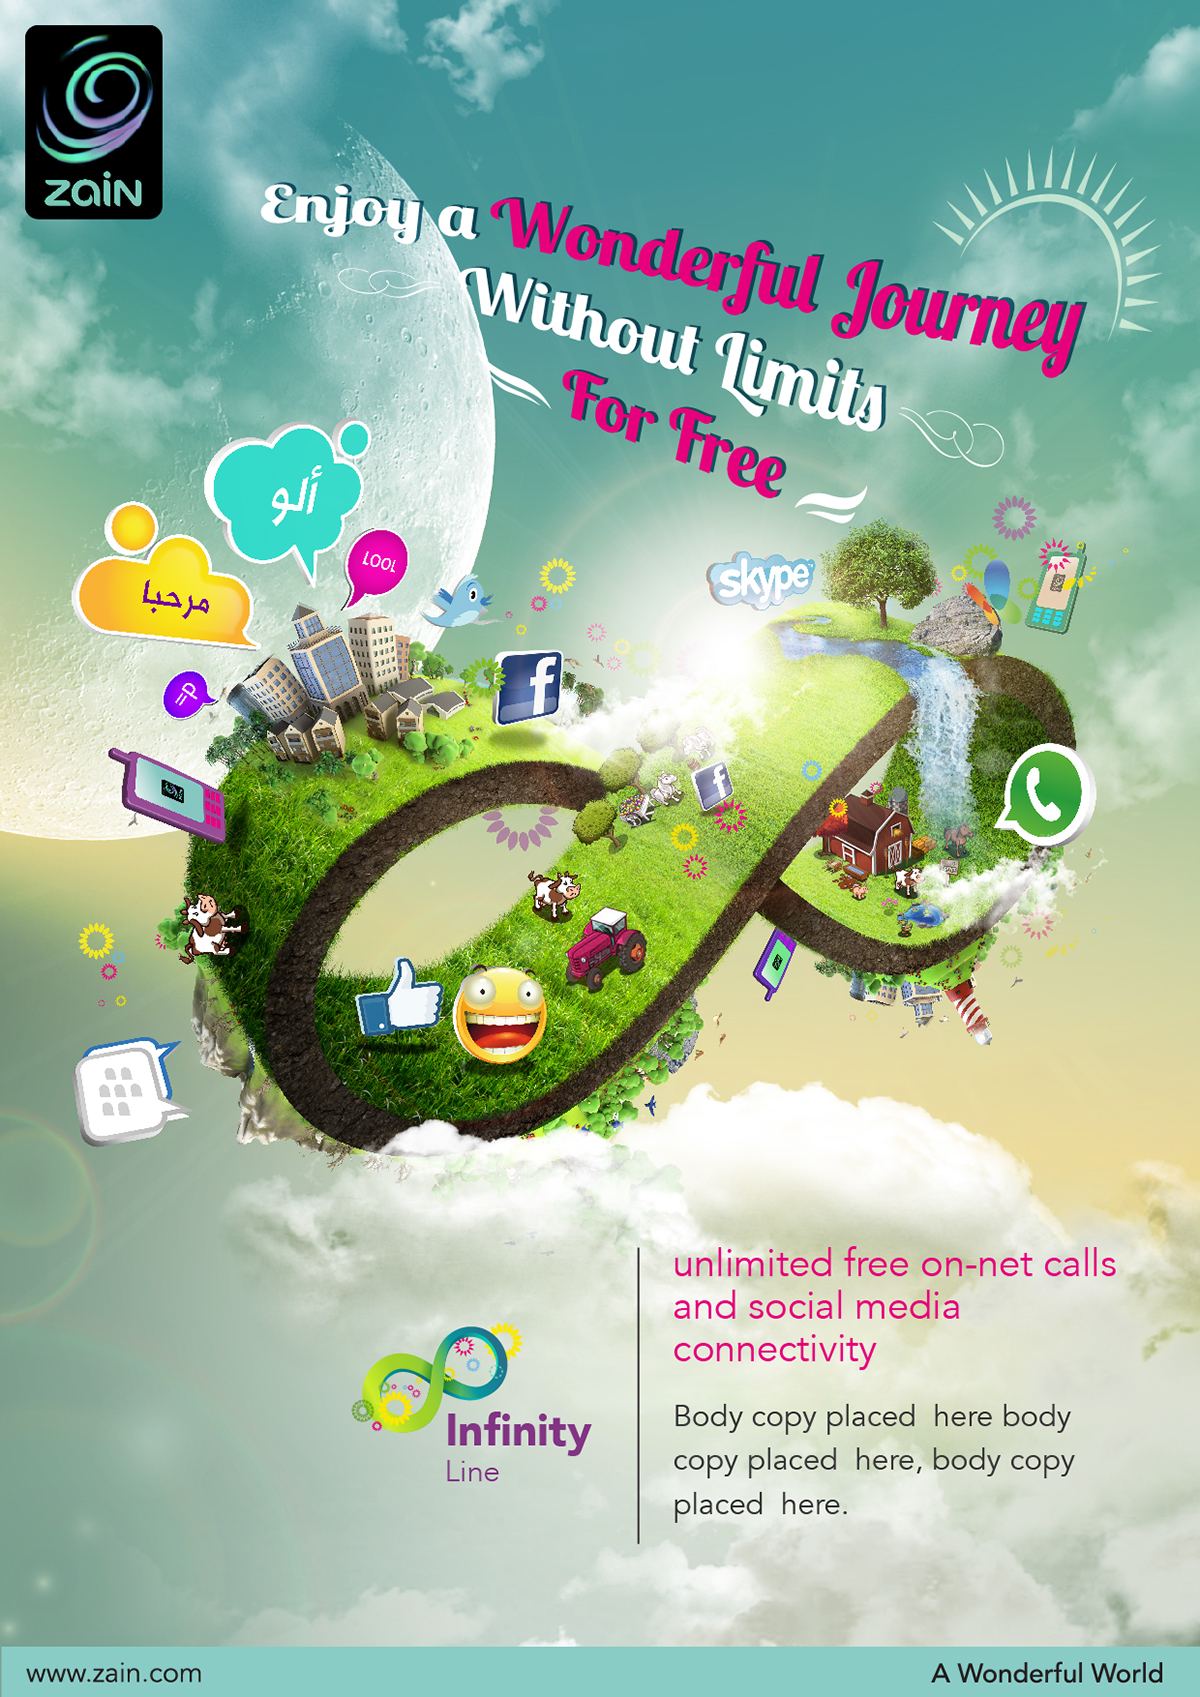 infinity limitless Unlimited social media For Ever never end Zain Telecom Telecommunication iraq Neverland imaginary Magical dream rollercoaster